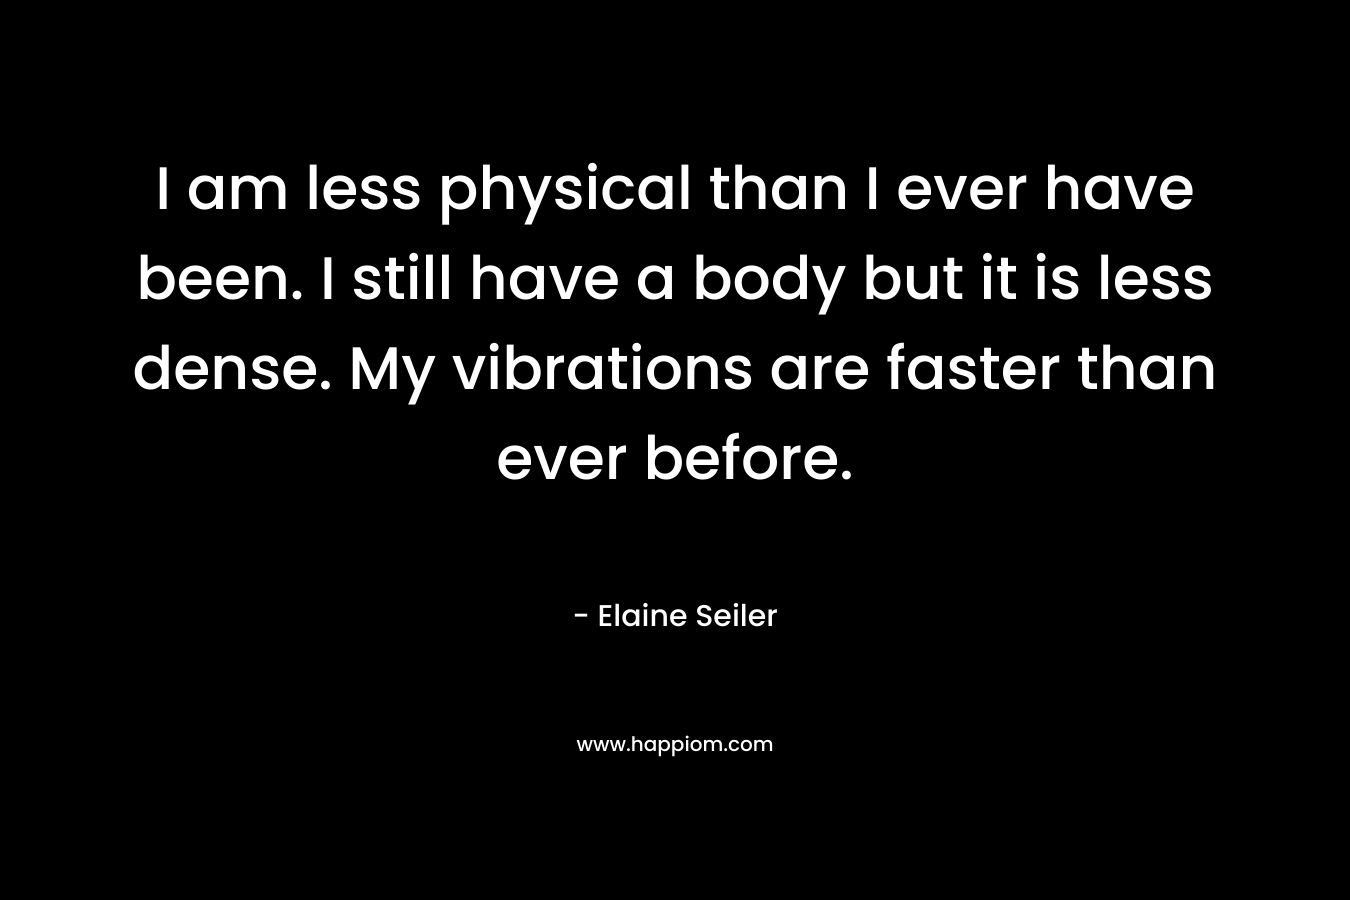 I am less physical than I ever have been. I still have a body but it is less dense. My vibrations are faster than ever before. – Elaine Seiler